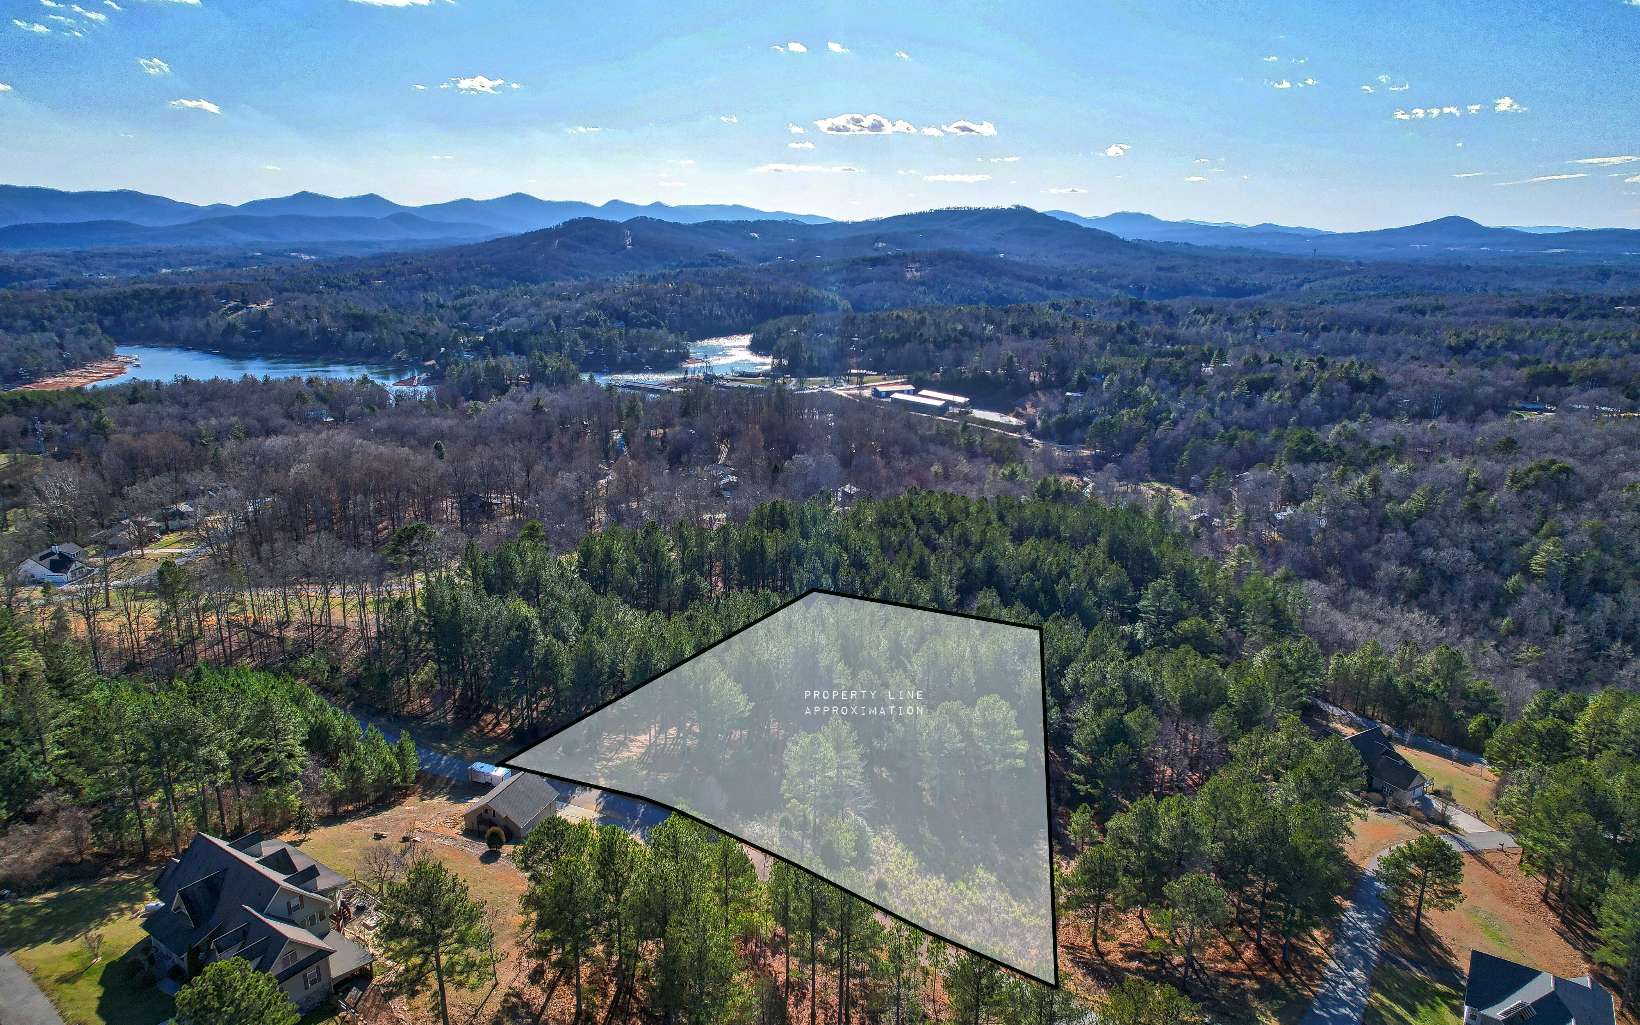 The perfect building lot! It is secluded enough to avoid the noise of town, yet only 3-5 minutes to all the perks of Blairsville. Come check this property out for your next investment or your own place in the North Georgia Mountains.